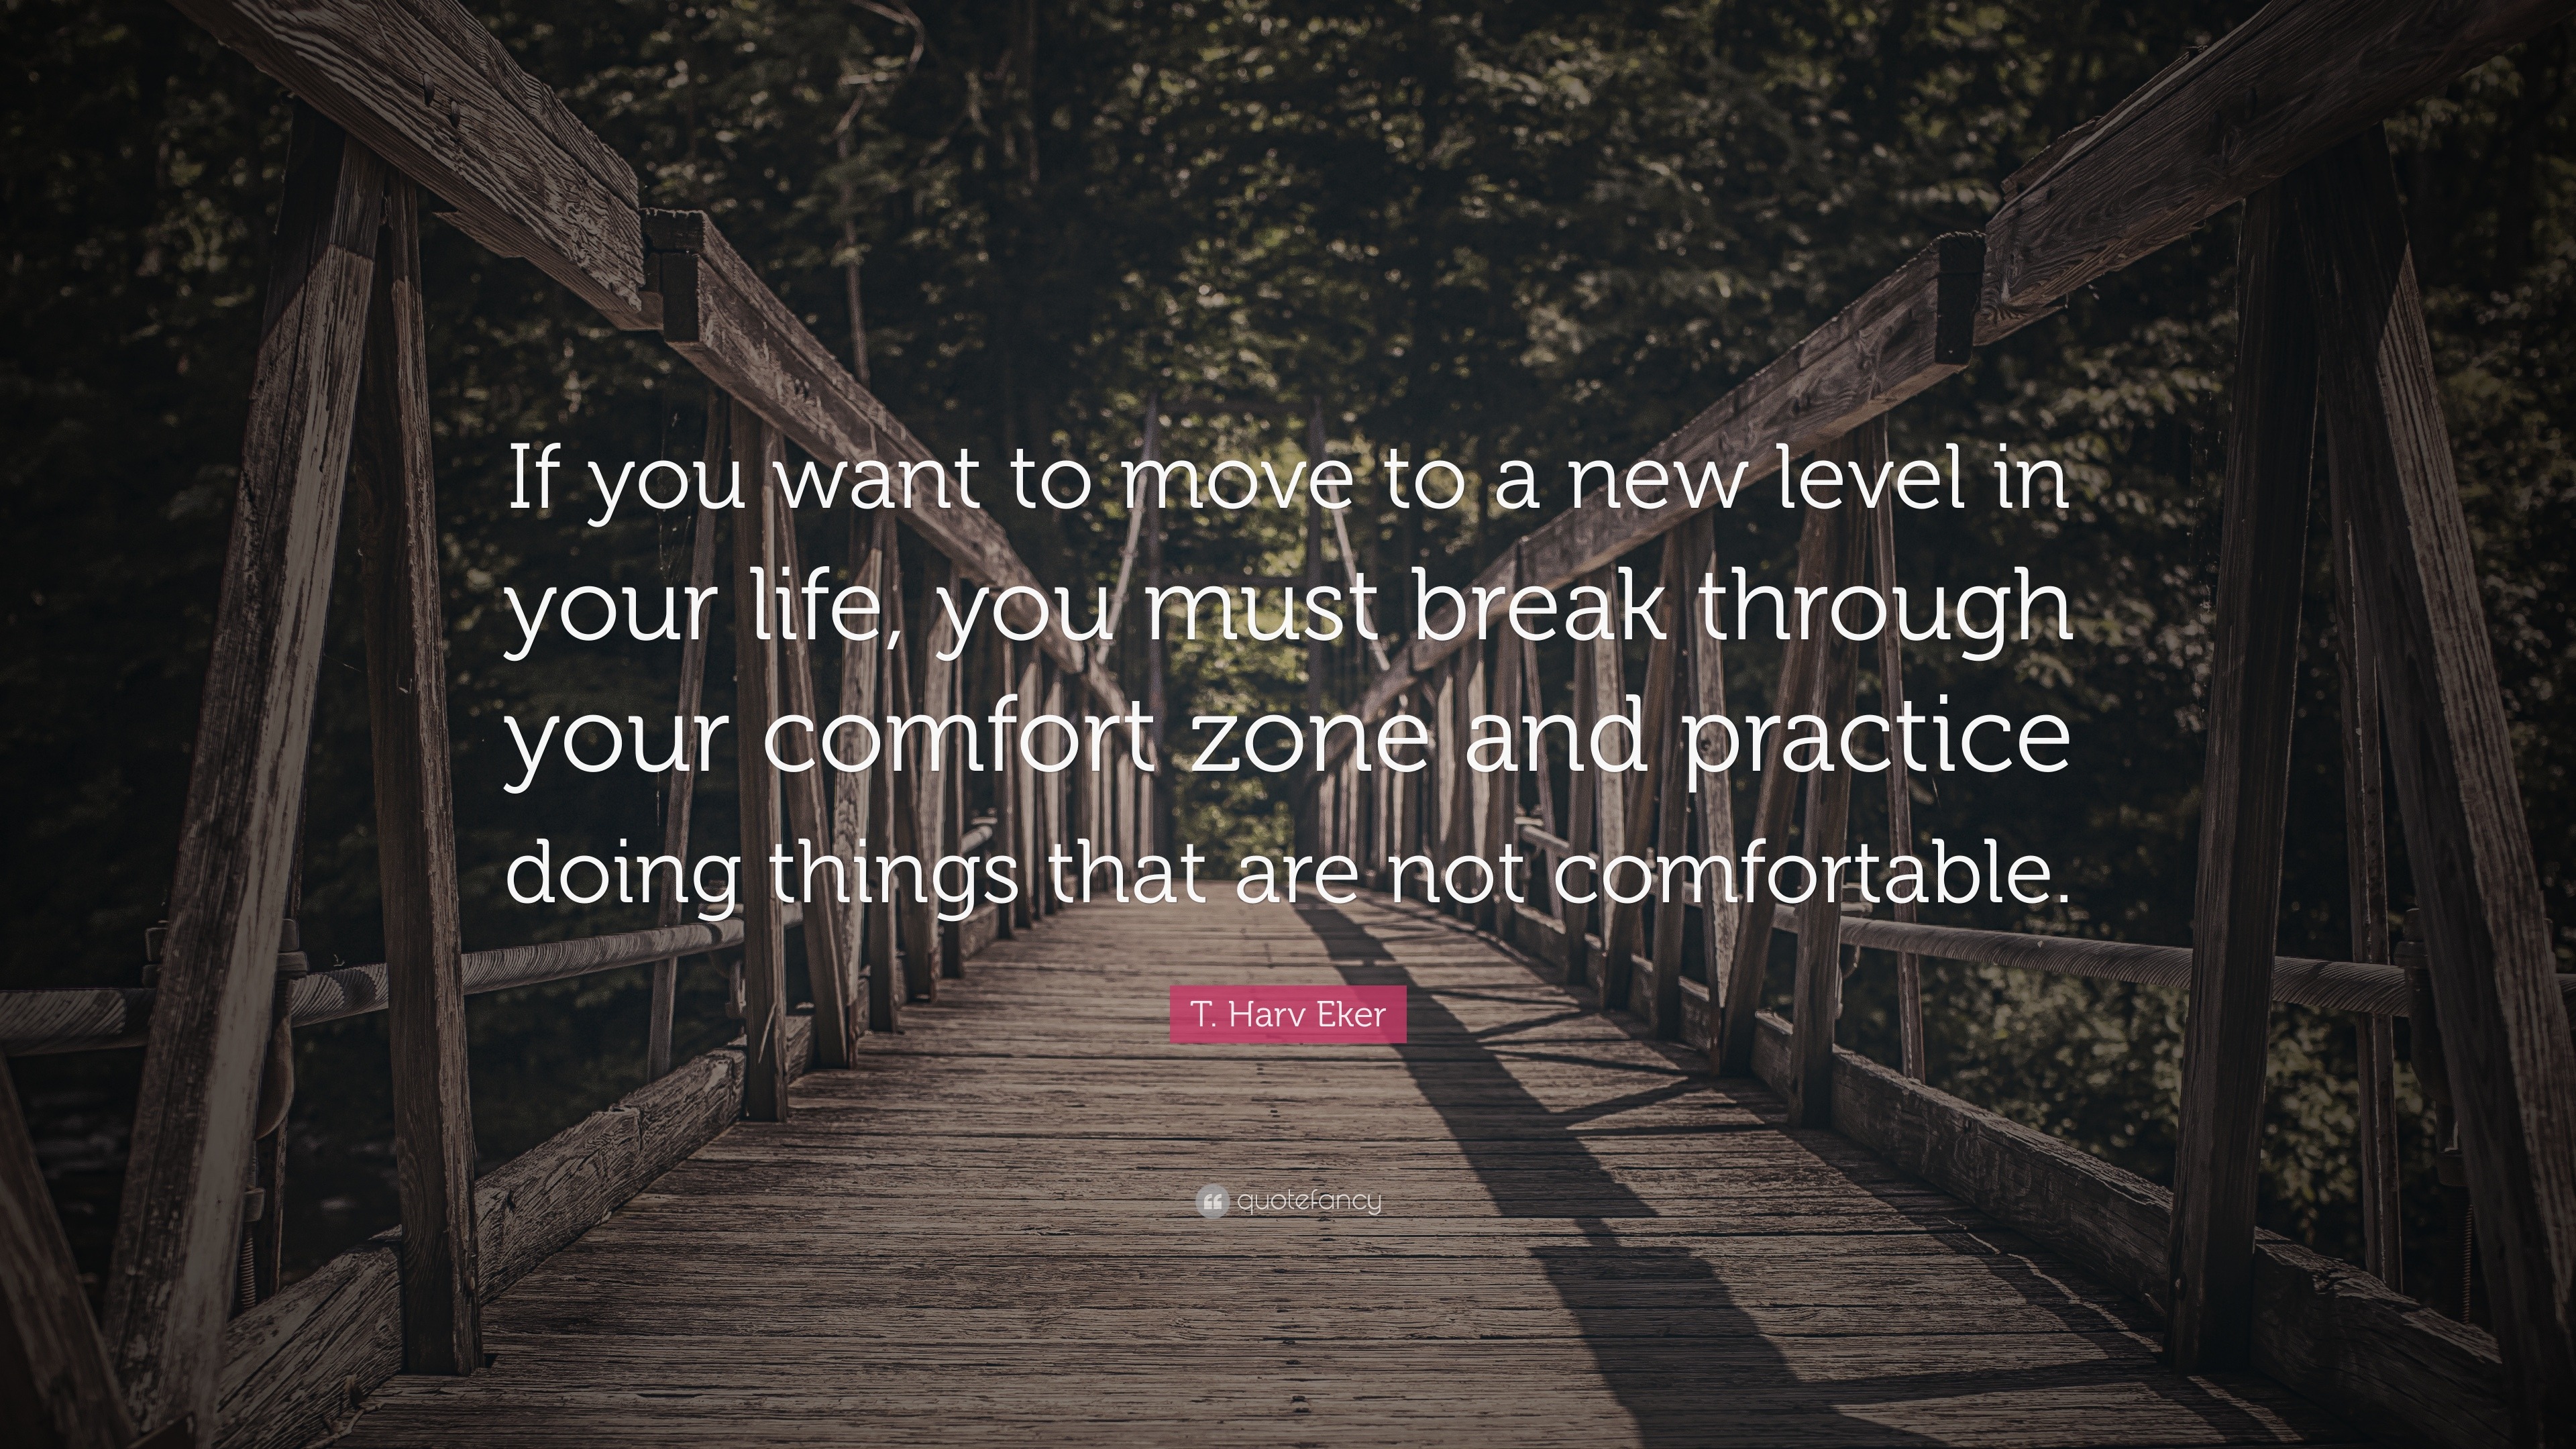 T Harv Eker Quote “If you want to move to a new level